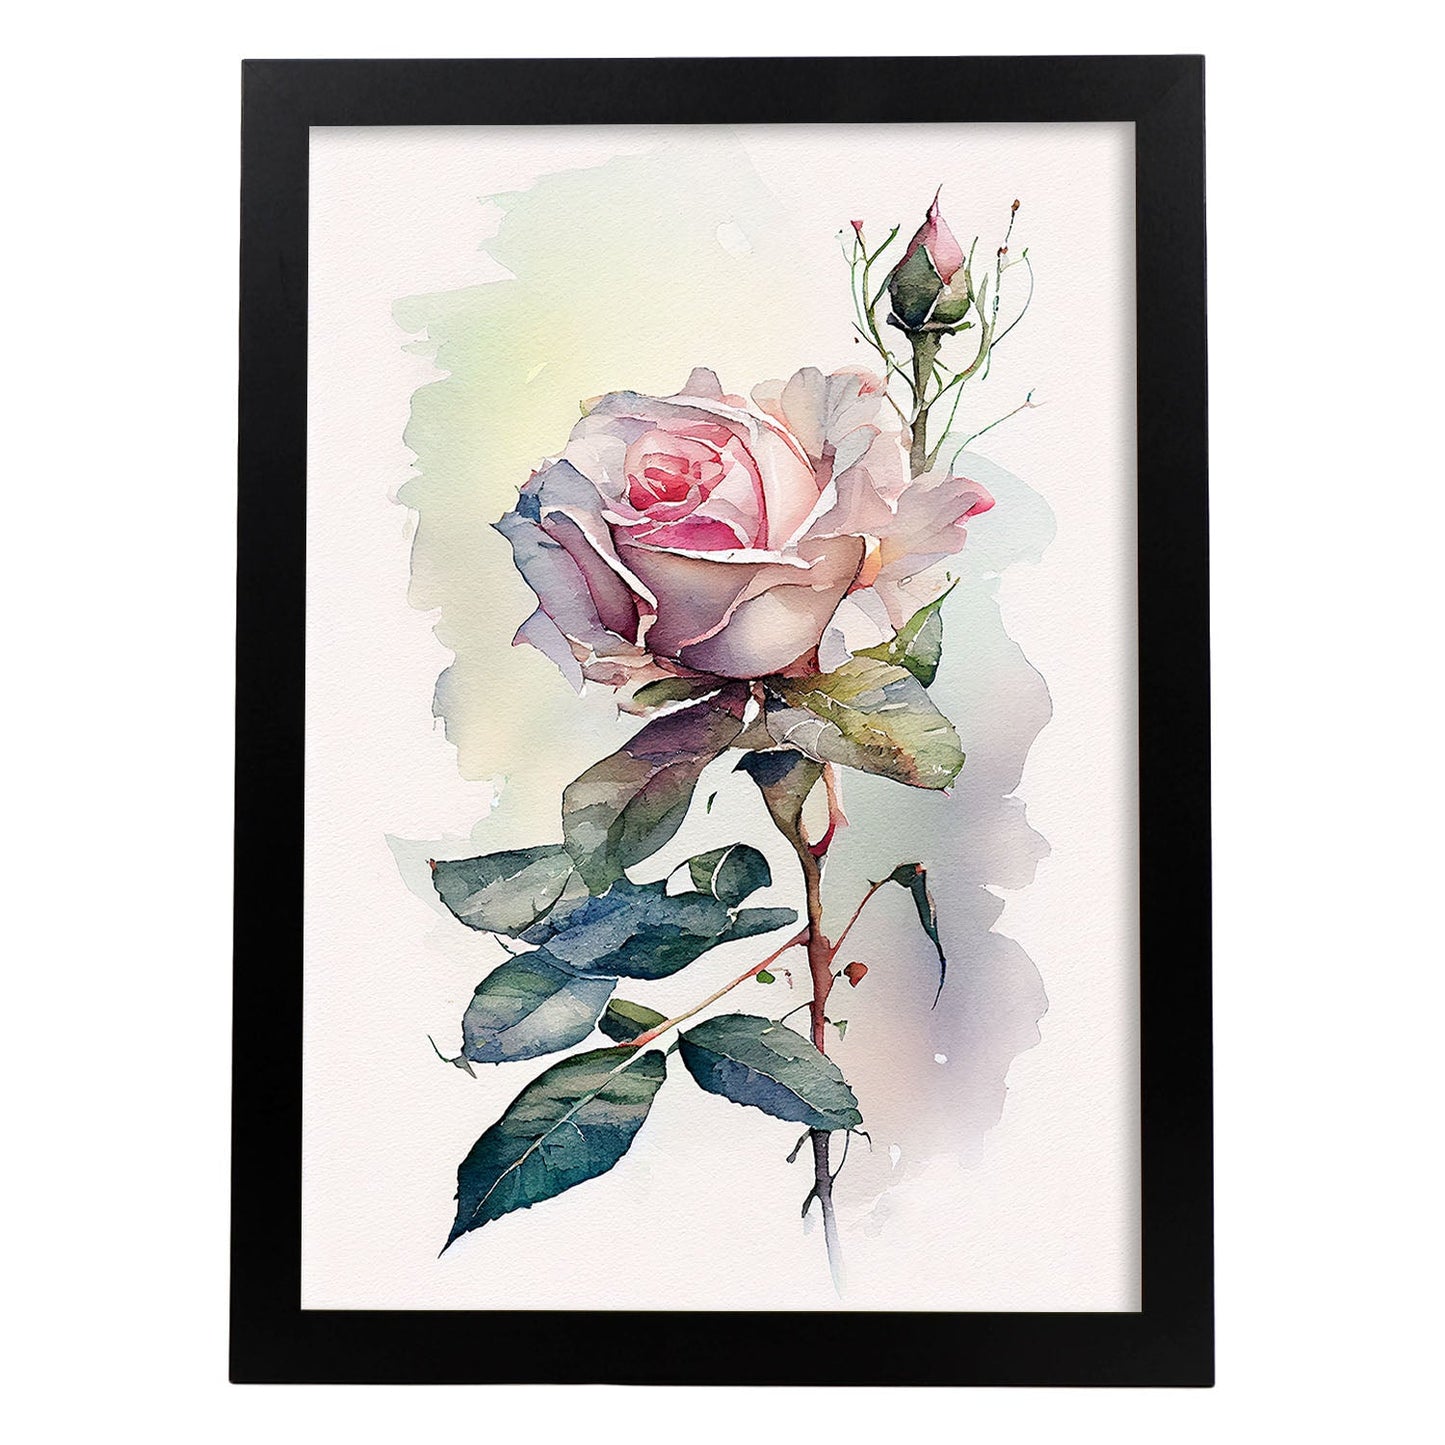 Nacnic watercolor minmal Rose_1. Aesthetic Wall Art Prints for Bedroom or Living Room Design.